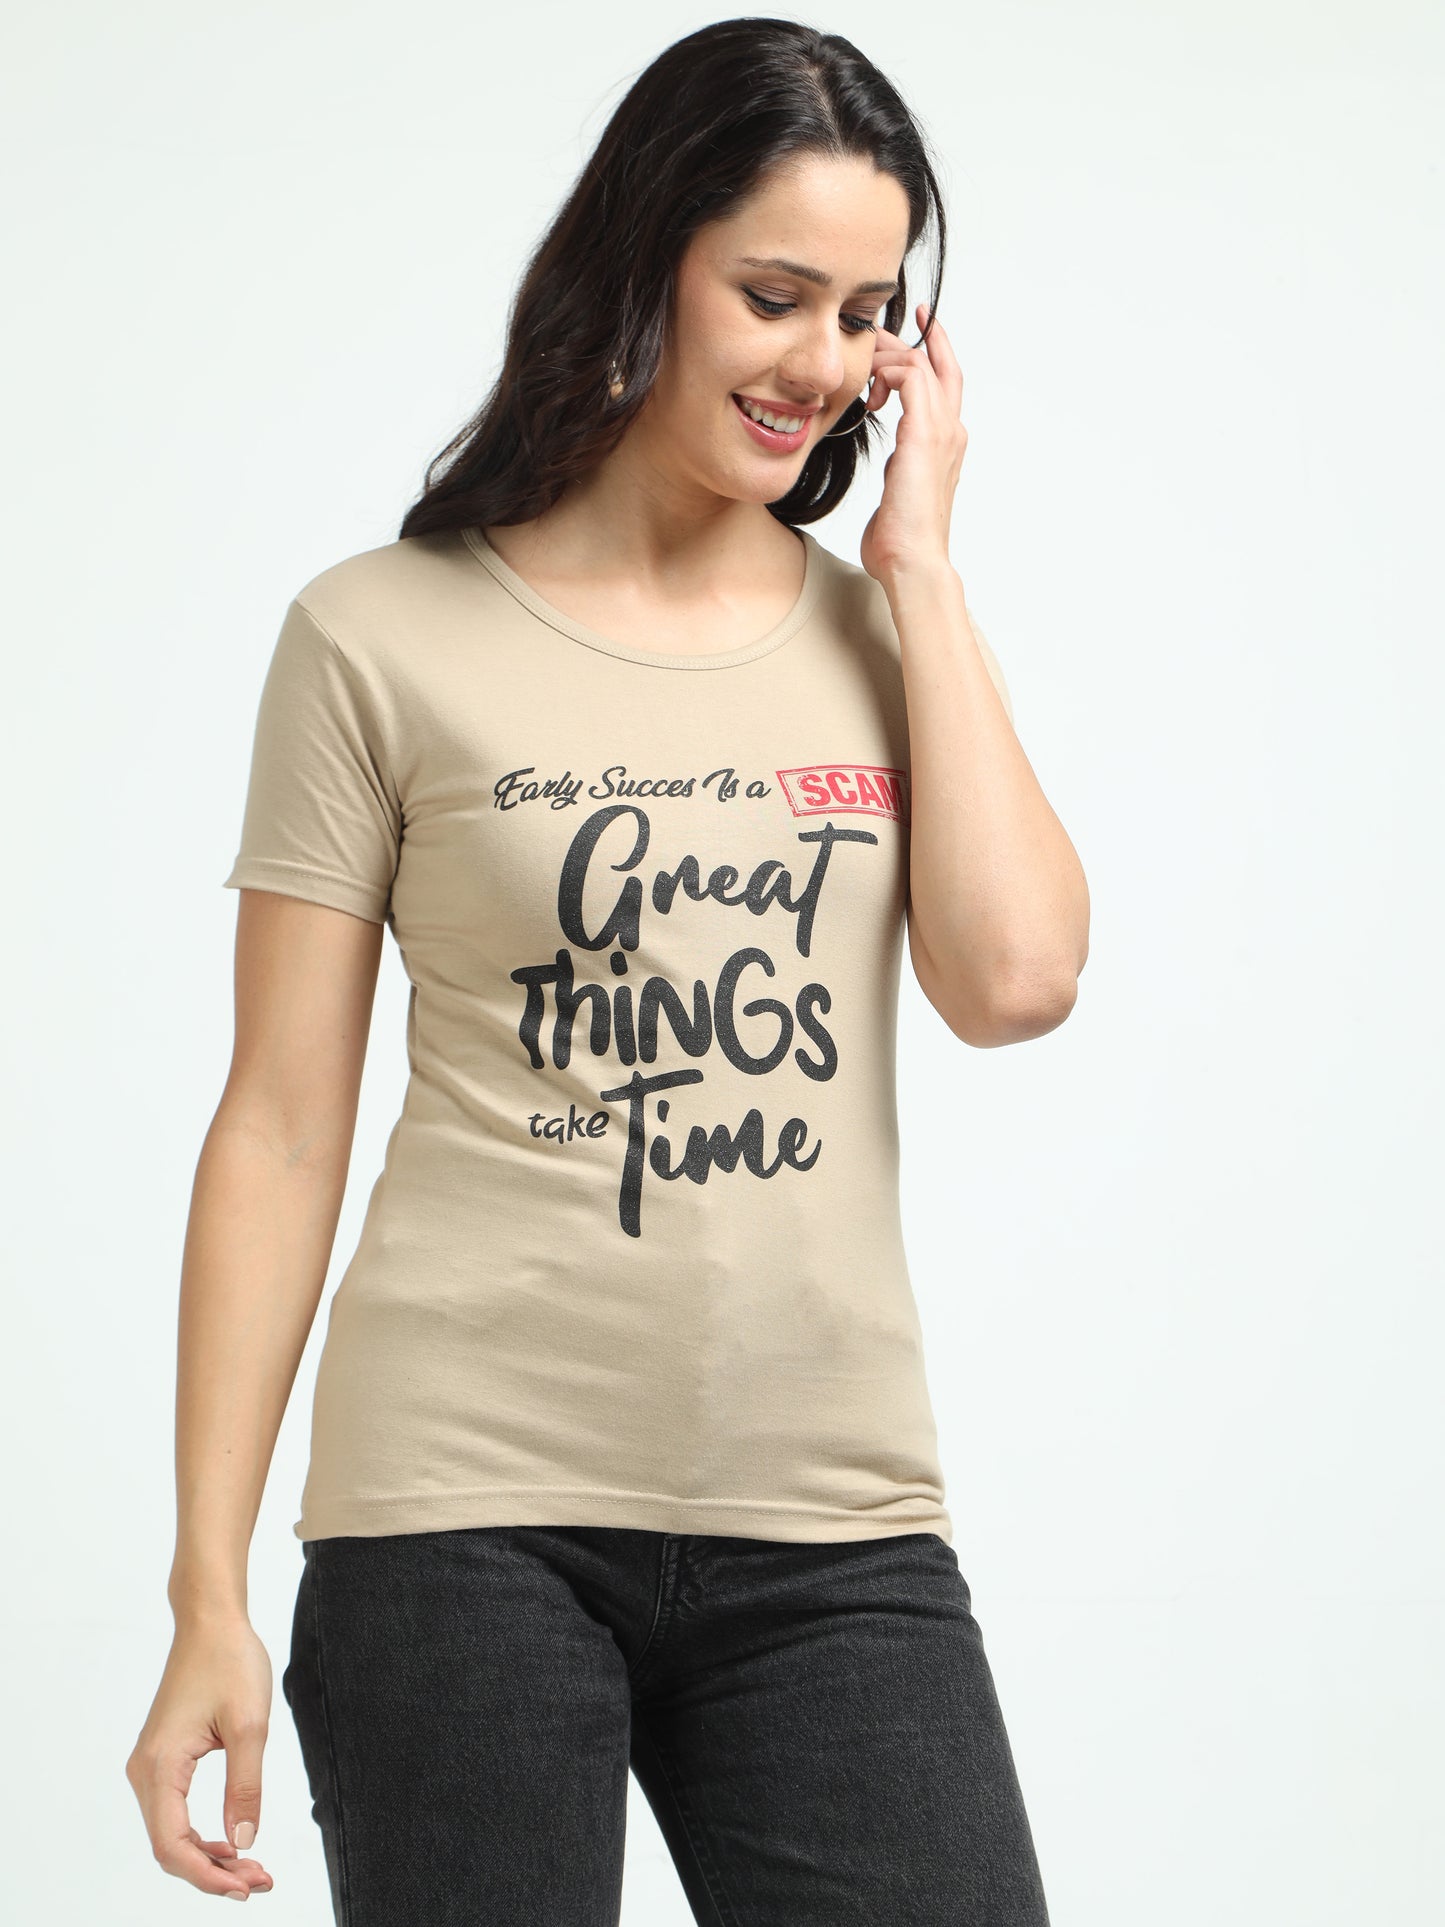 Women's Cotton Round Neck Typography Printed Half Sleeve T-Shirt (Pack of 2)